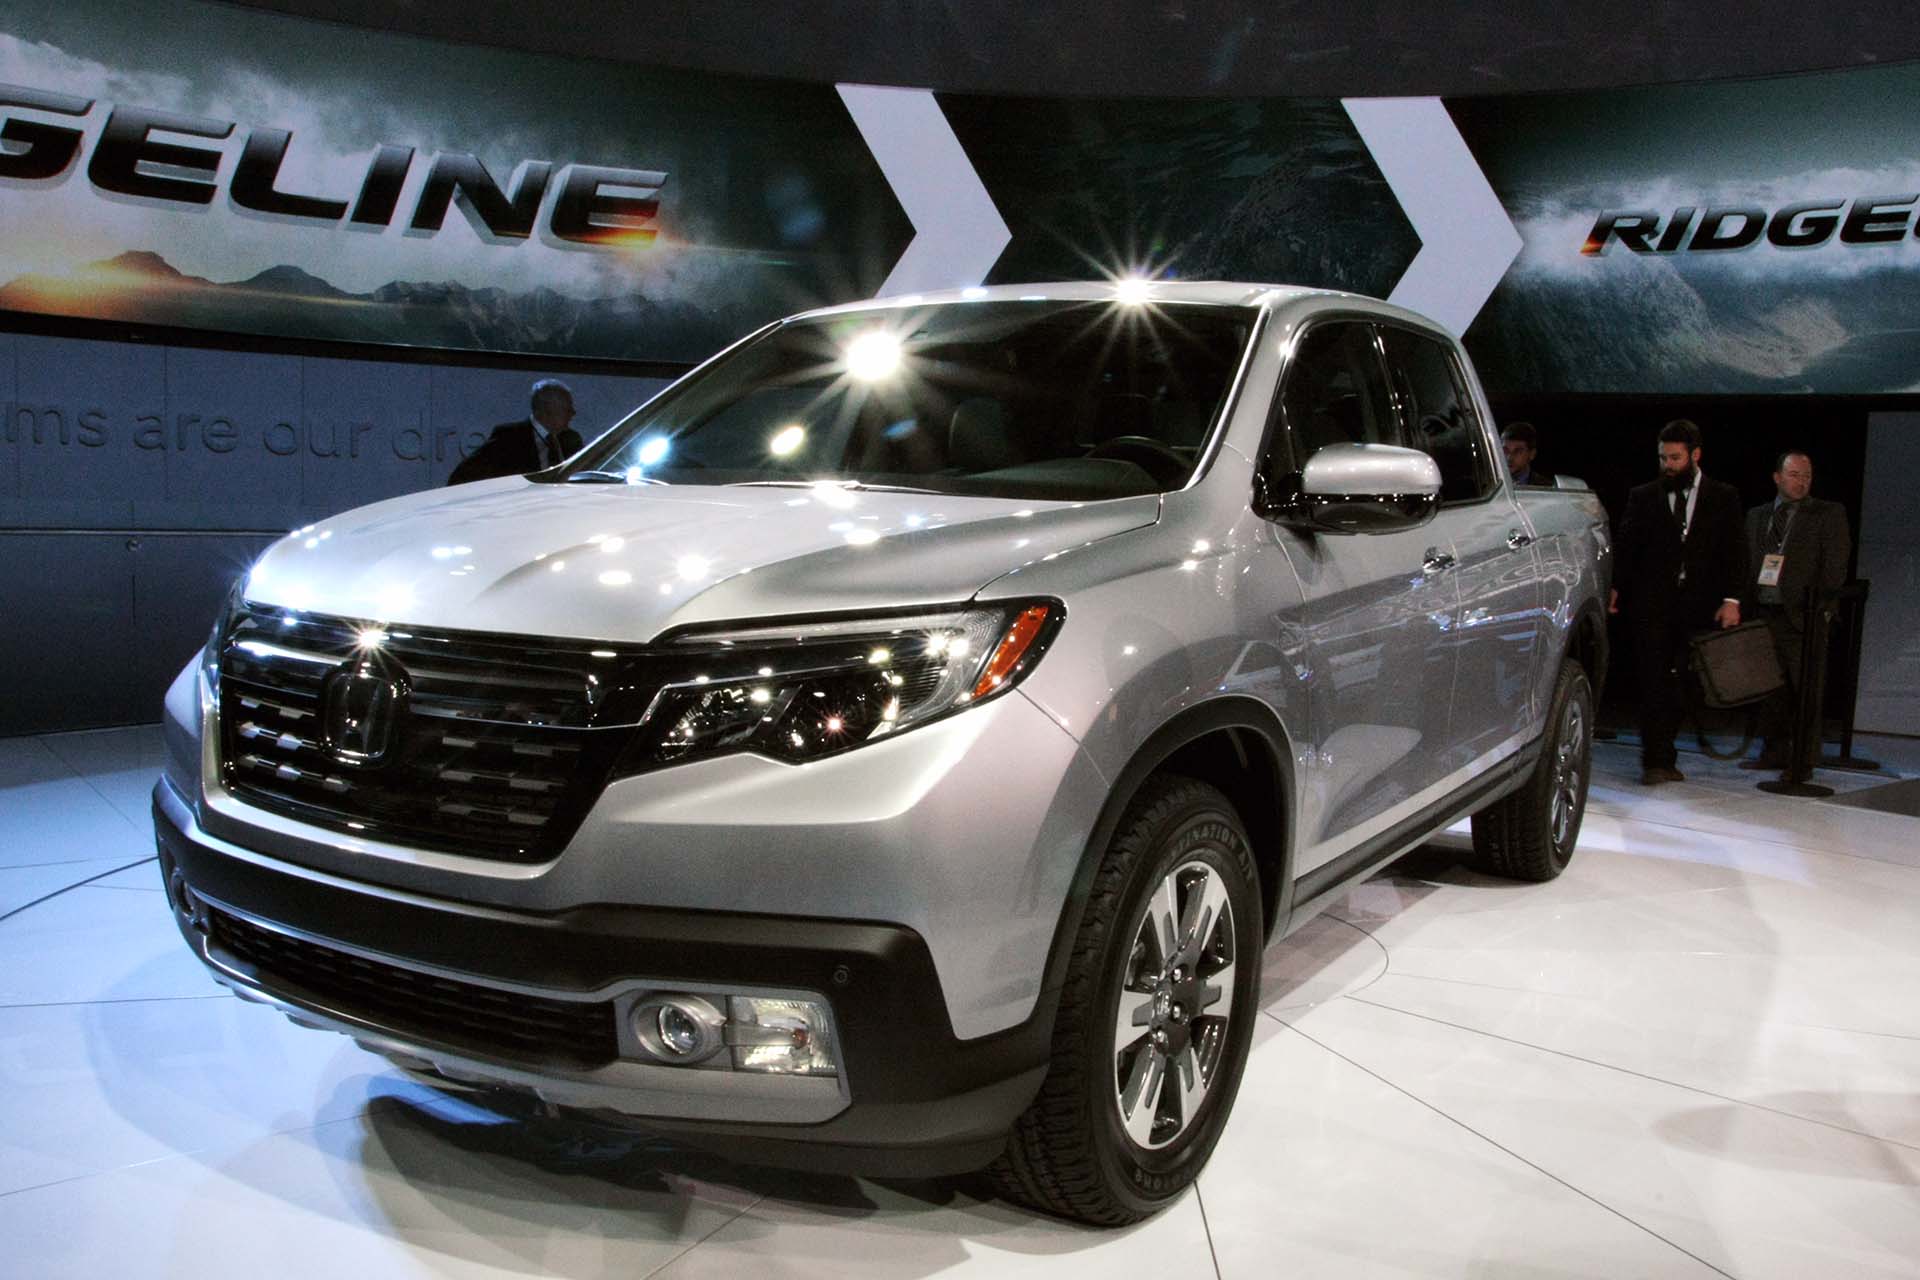 After a two-year hiatus, the Honda Ridgeline is making a comeback with some new tunes – literally, with its in-bed stereo system. (Tailgaters take note.) It's up against some stiff competition though, so here's hoping it'll impress the judges and the concert-goers, I mean, potential buyers.